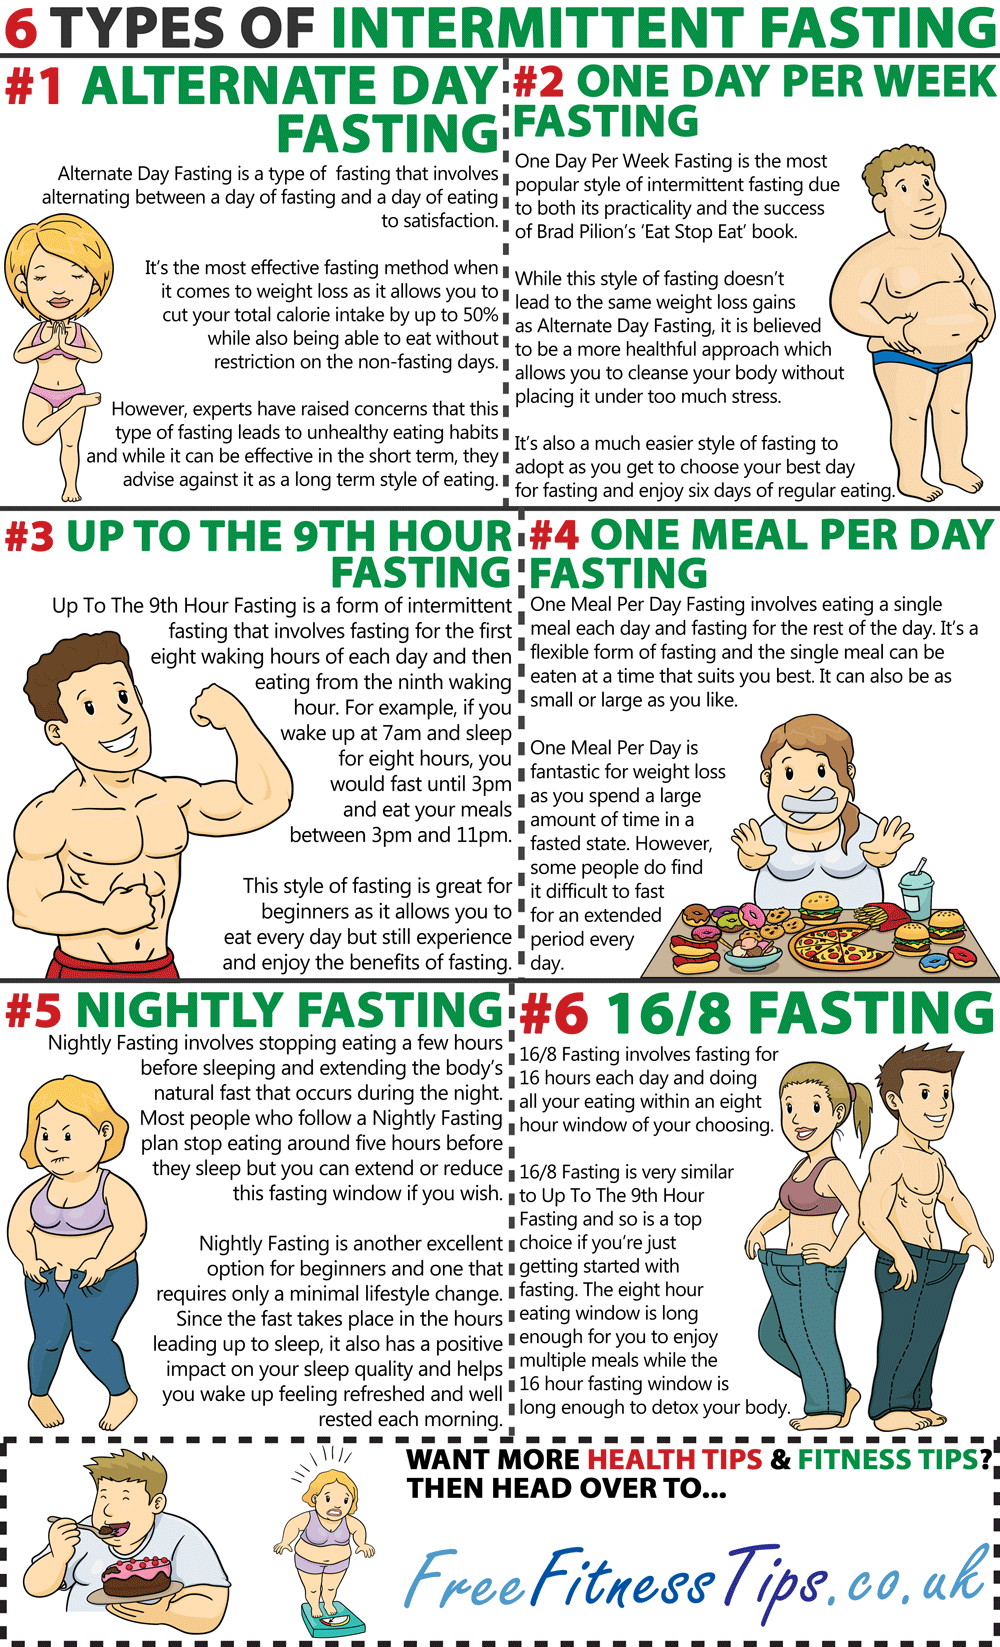 Different Ways Of Intermittent Fasting - Infographic